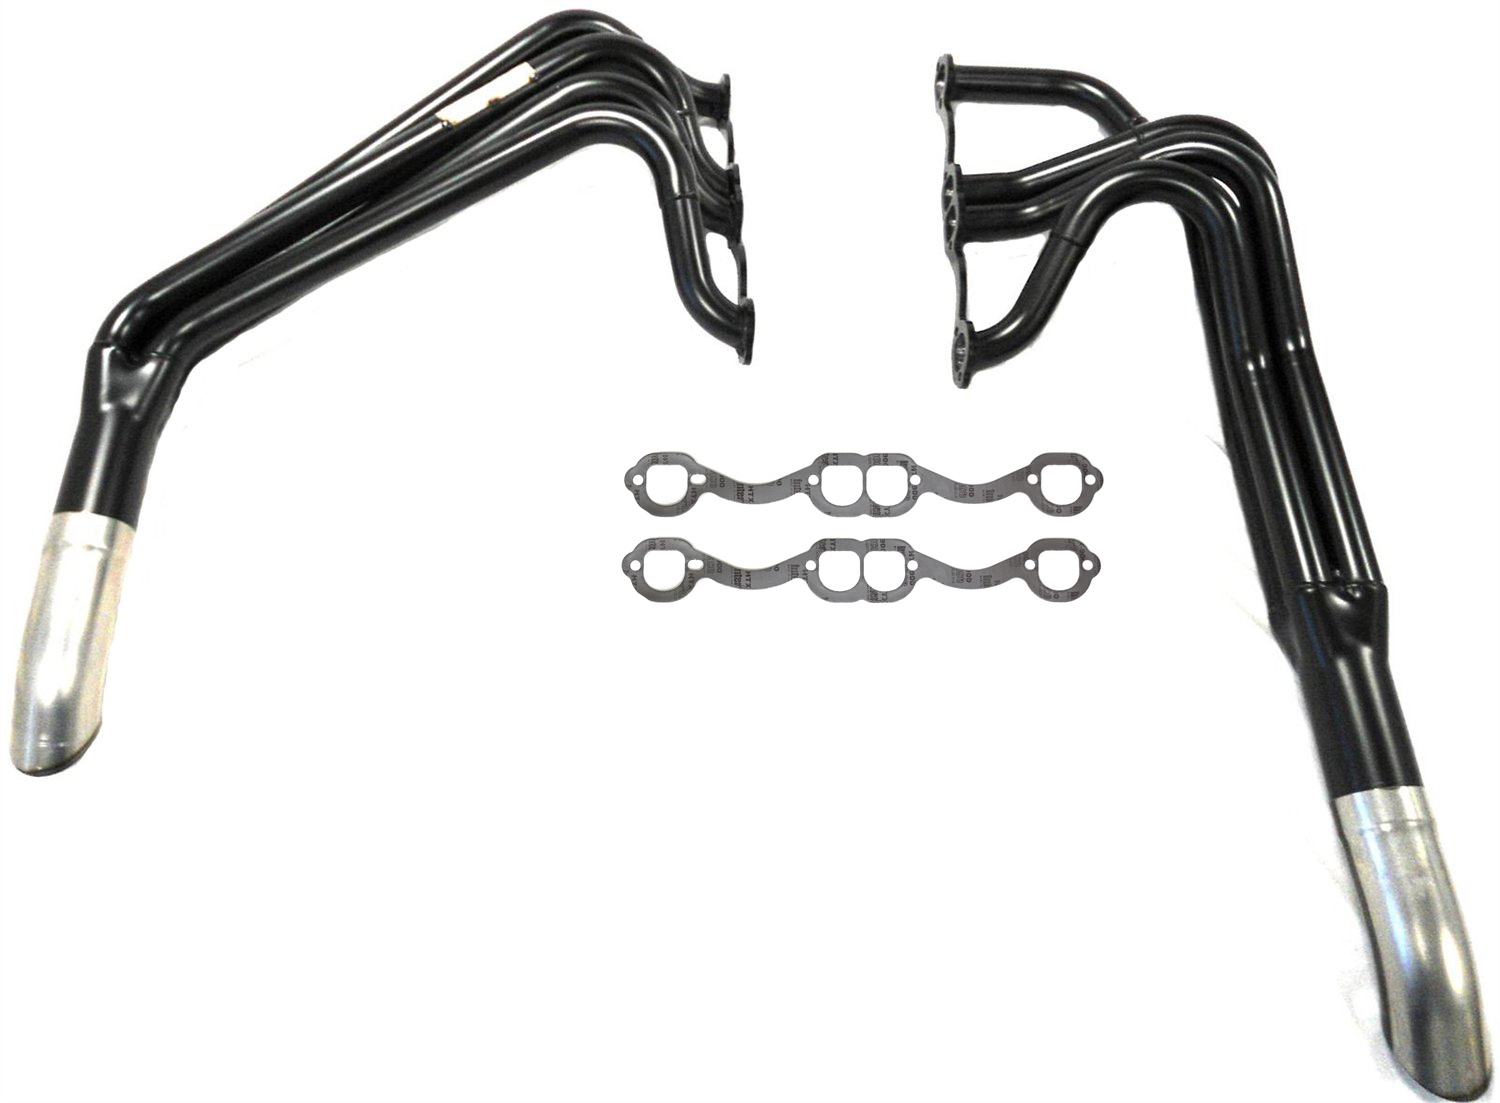 Headers - IMCA-UMP Modified - 1-5/8 to 1-3/4 in Primary - 3 in Collector - Steel - Black Paint - Small Block Chevy - Pair